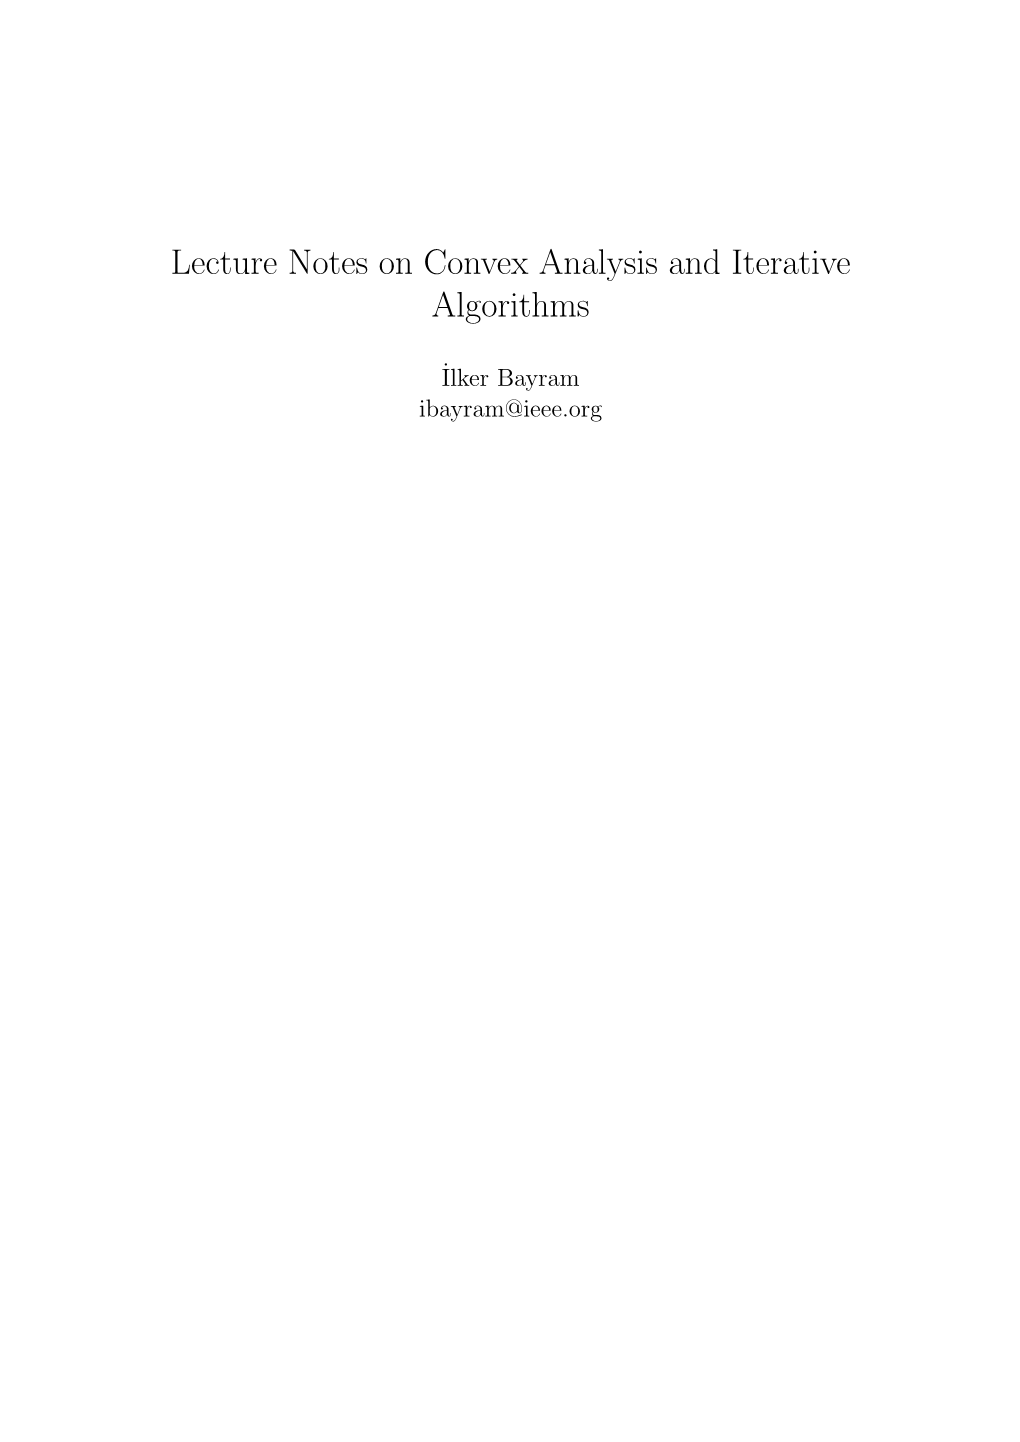 Lecture Notes on Convex Analysis and Iterative Algorithms